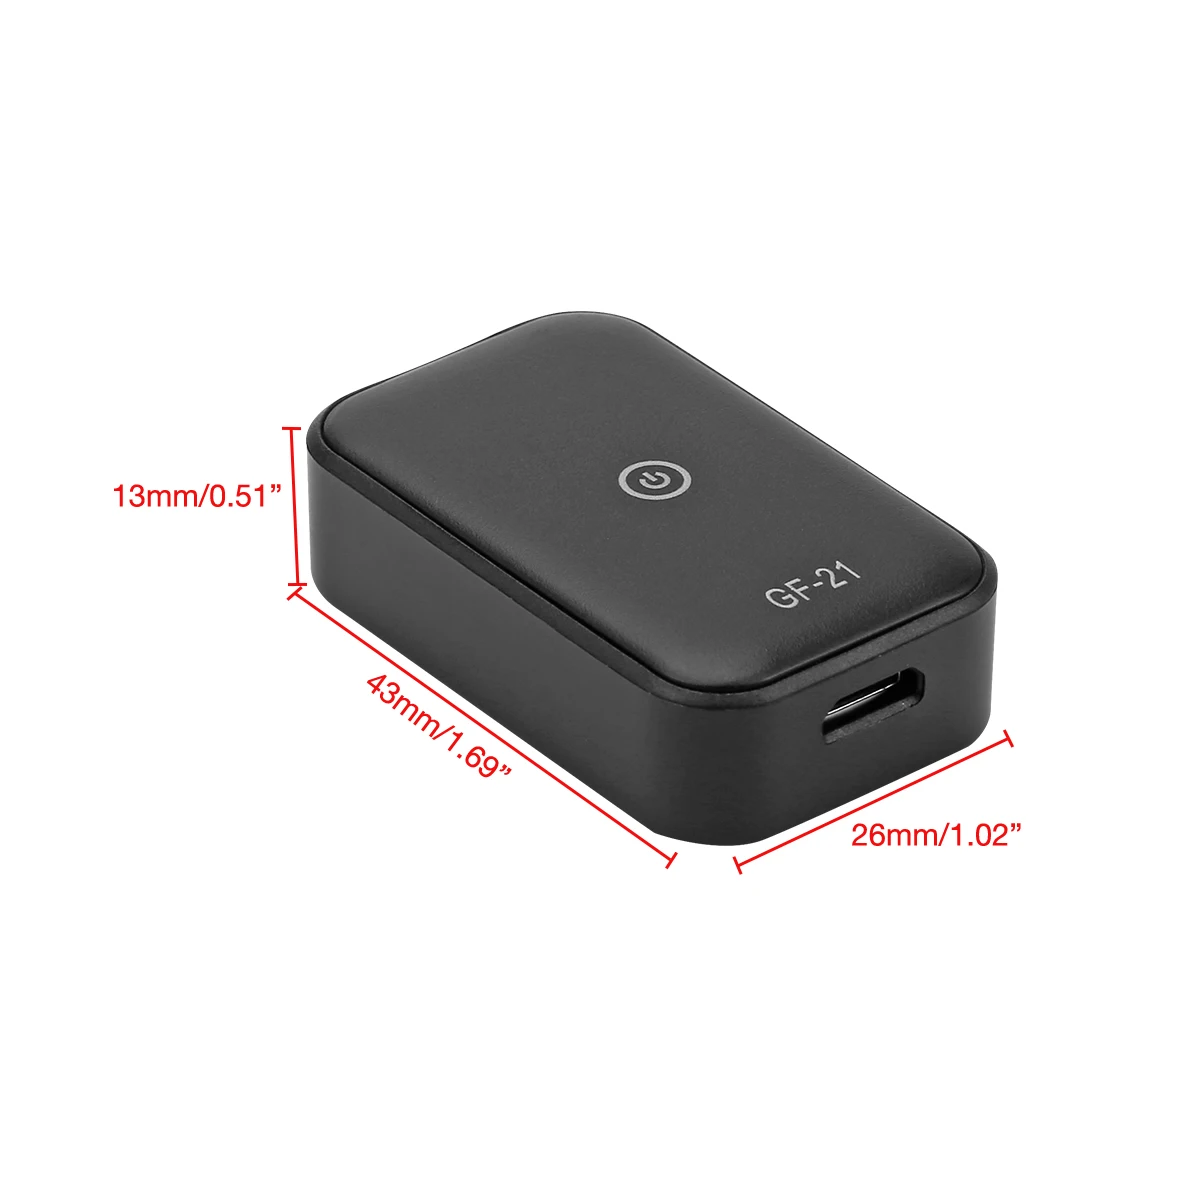 Mini Car GPS Tracker AGPS/LBS/WIFI/GPS Real-Time Voice Monitoring Anti-Lost SOS Device App Remote Control Vehicle Tracker best gps tracker for car